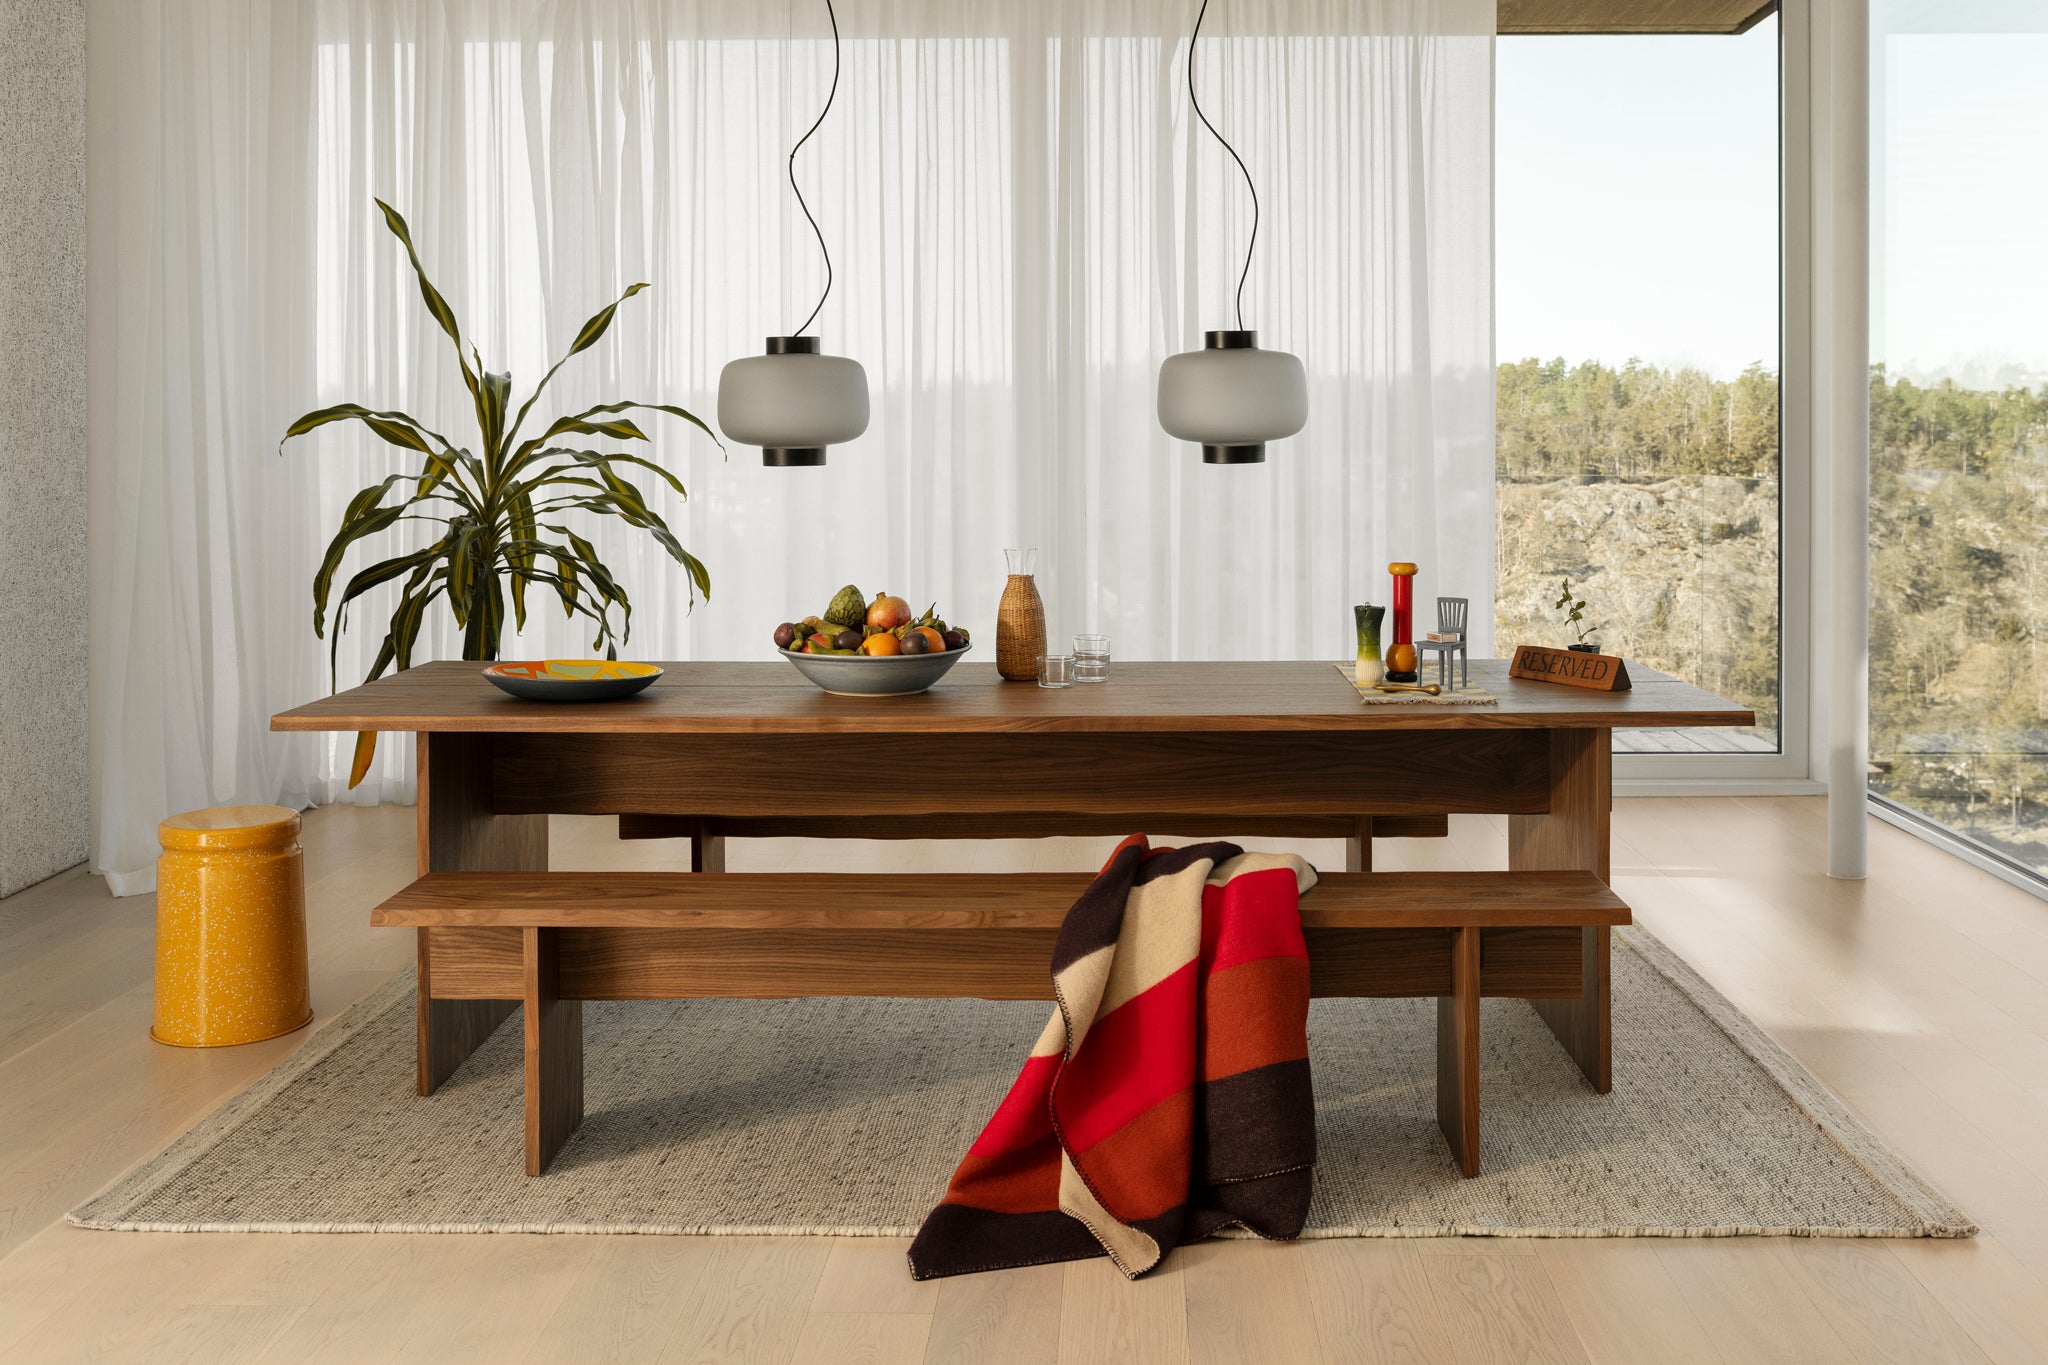 A Hem dining room scene featuring the Bookmatch Table + Bench Set in Walnut, Dusk Lamps, Dune Rug and Last Stool.